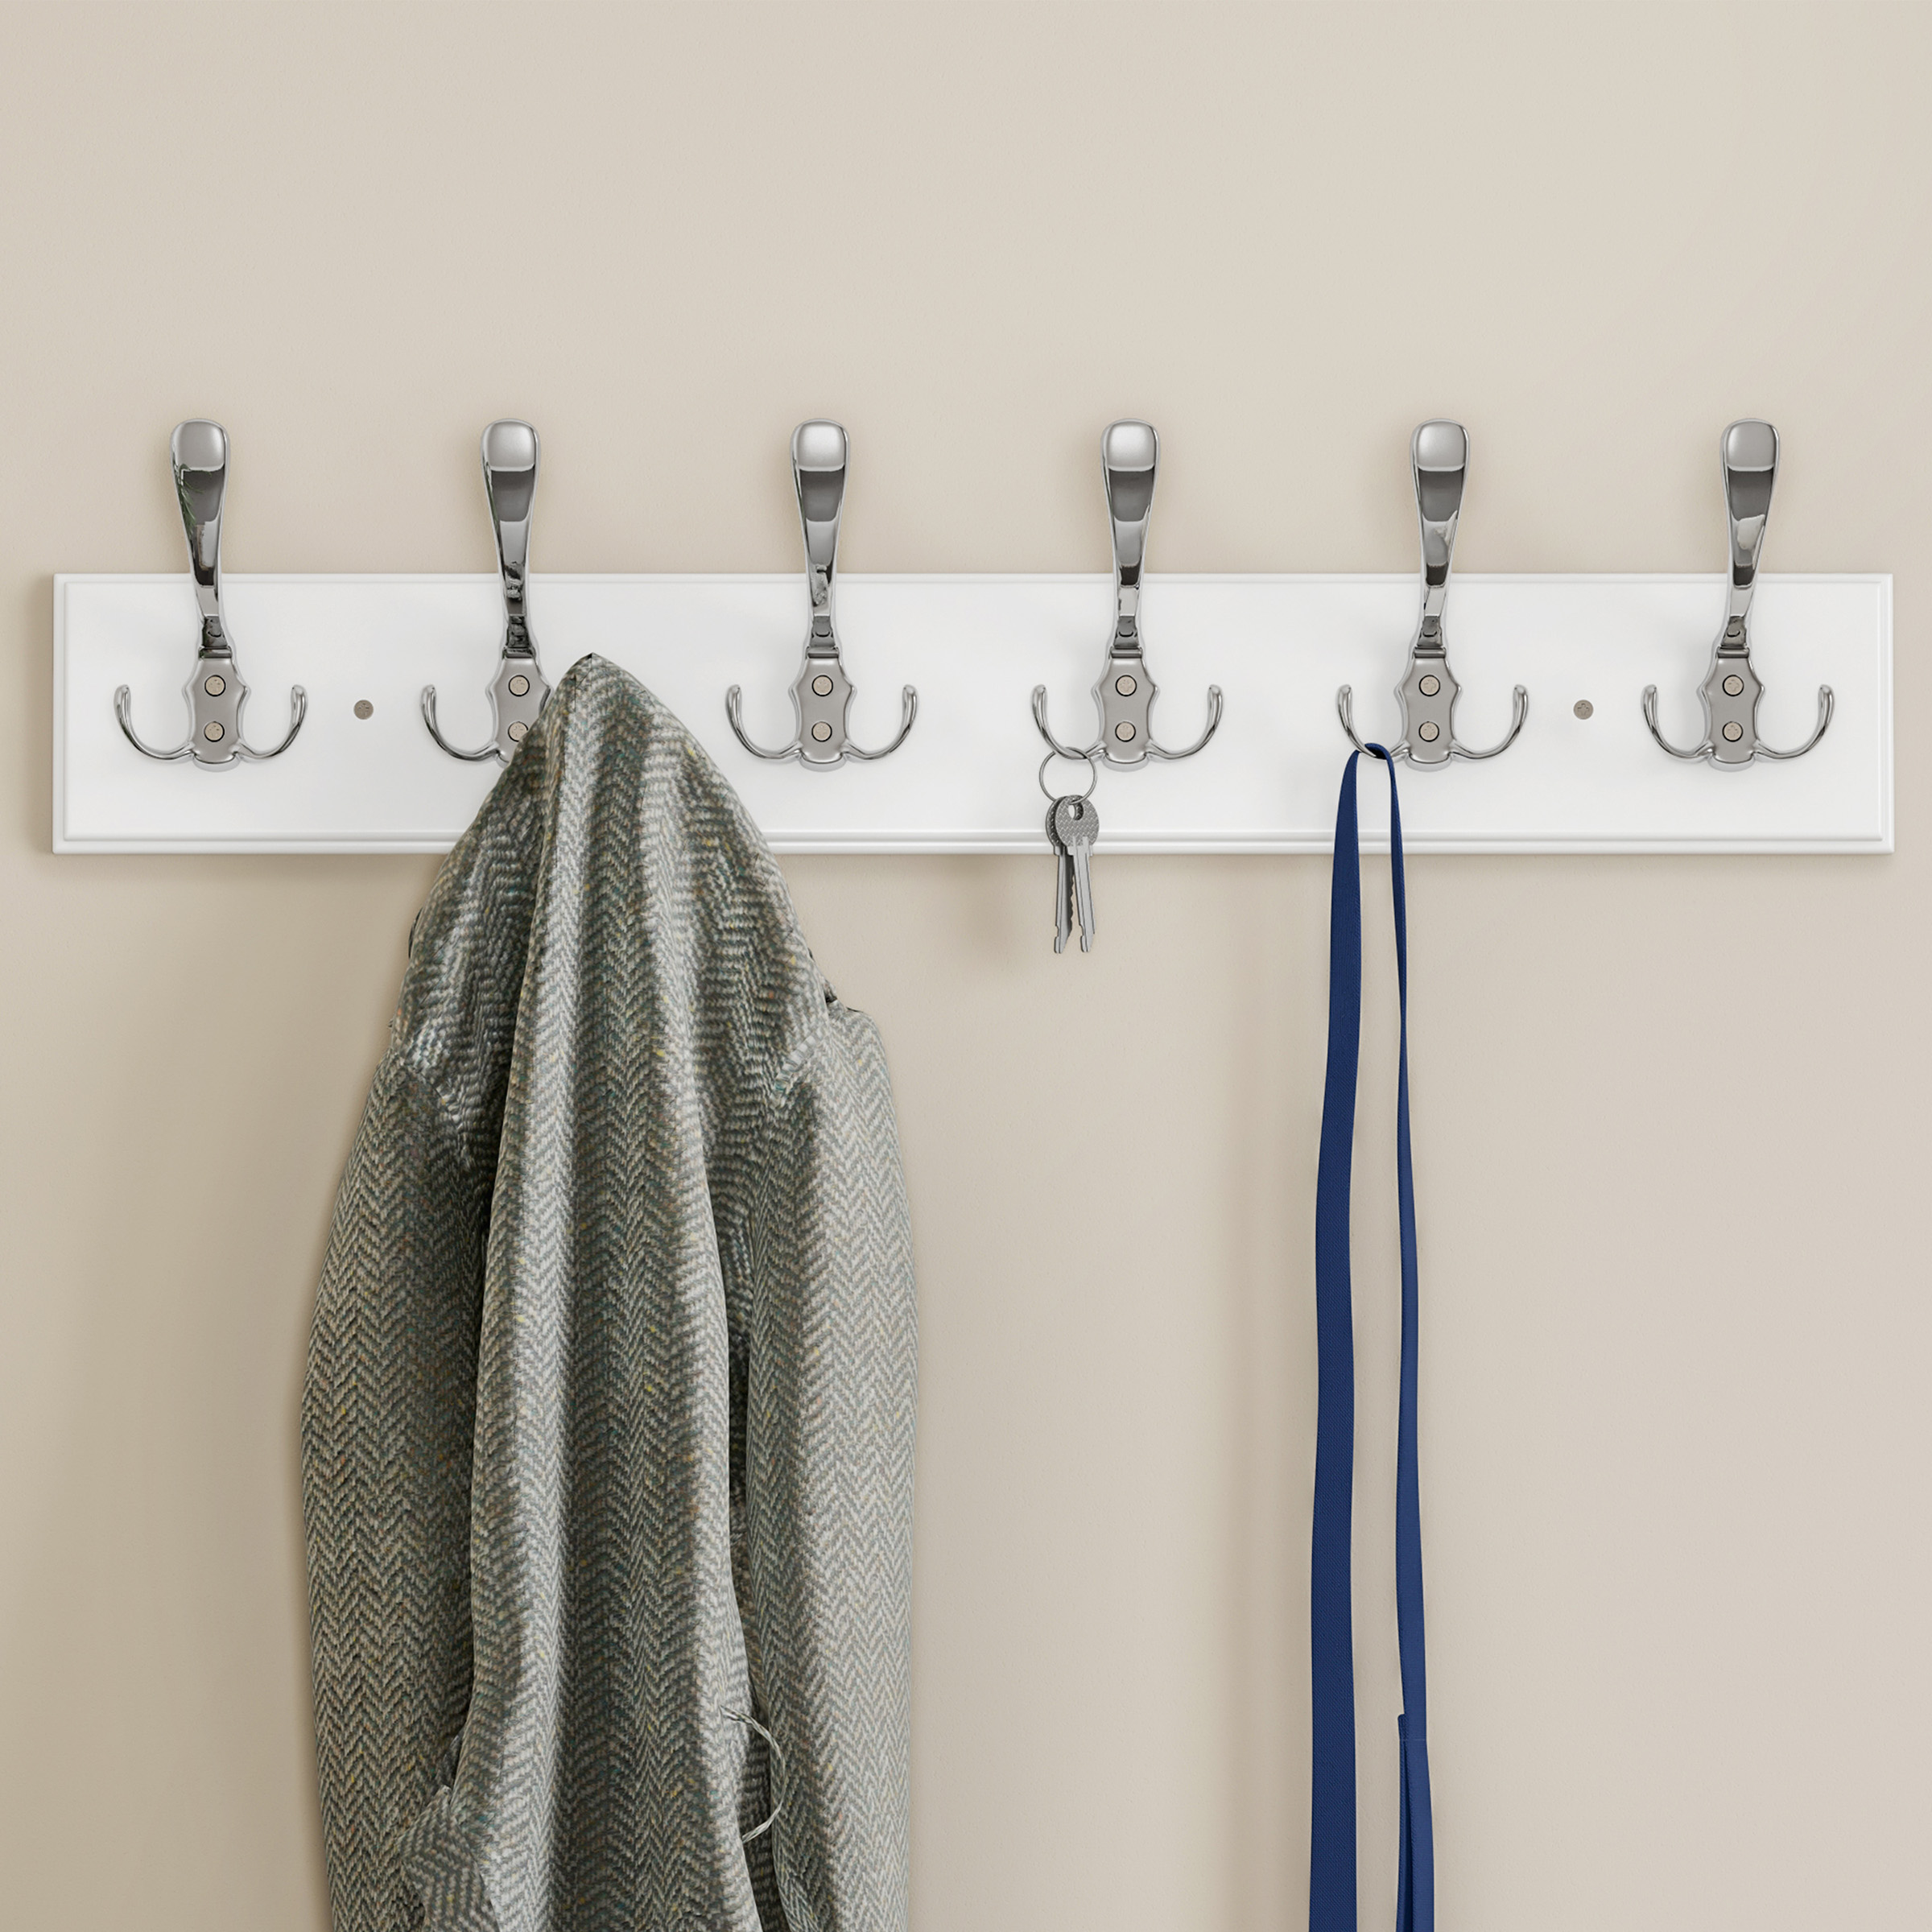 Wall Hook Rail-Mounted Hanging Rack With 6 Hooks-Entryway, Hallway, Or Bedroom-Storage Organization For Coats, Towels, Bags By Lavish Home (White) - image 1 of 7